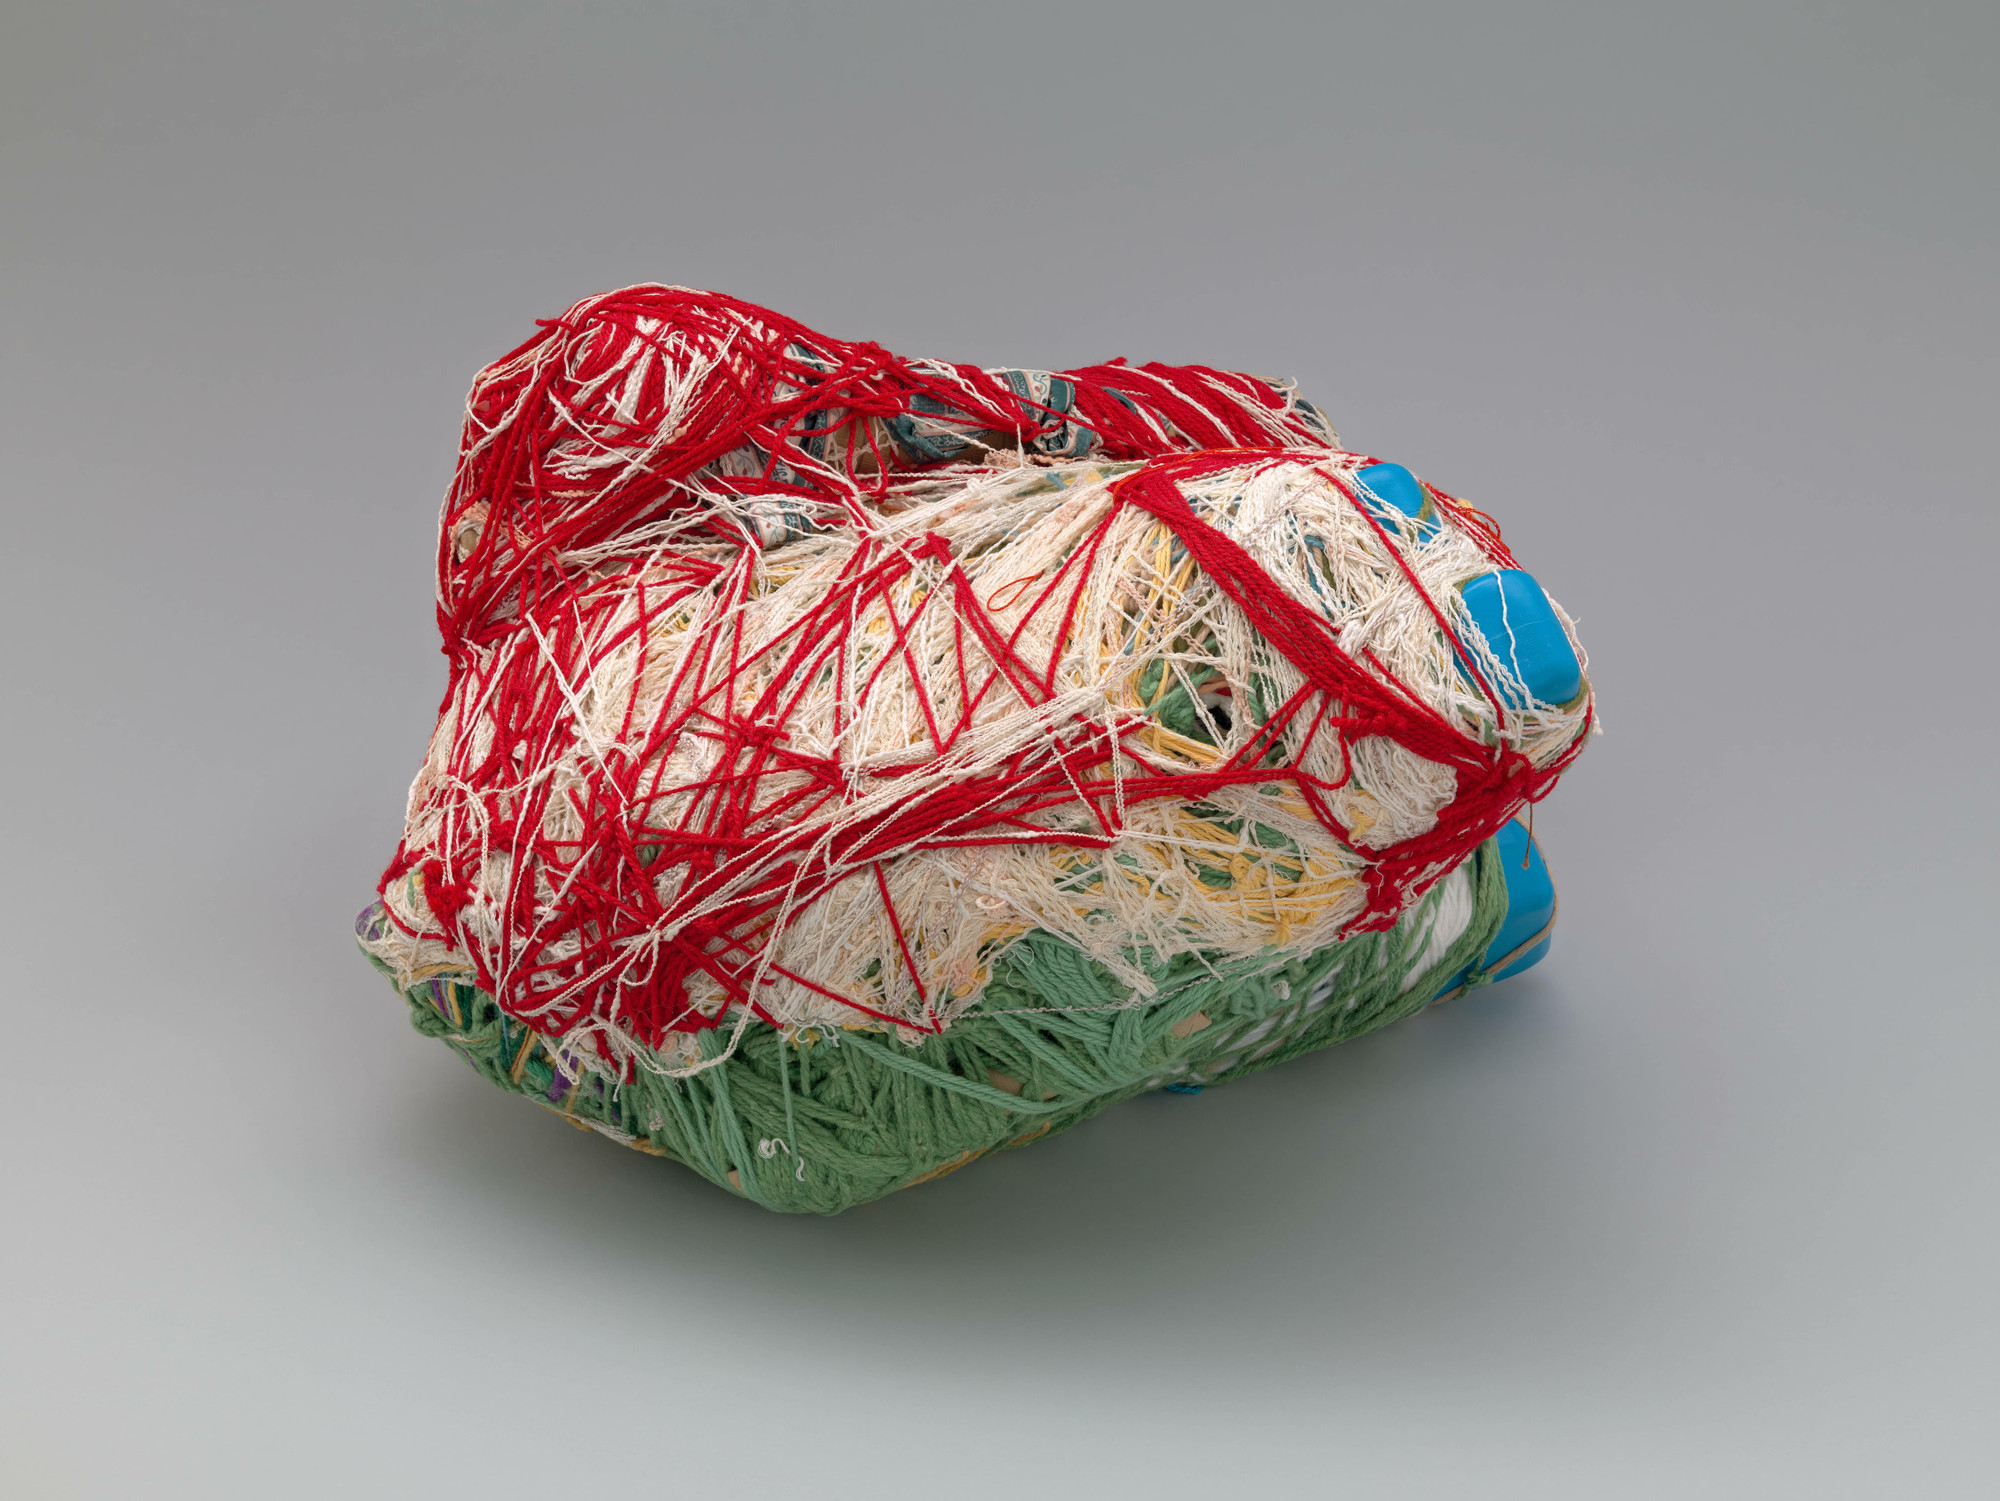 Judith Scott. Untitled. 2002. Found objects assembled and wrapped in twine and yarn, 19 × 8 × 9″ (48.3 × 20.3 × 22.9 cm). Gift of Martin and Rebecca Eisenbeg in honor of Matthew Higgs